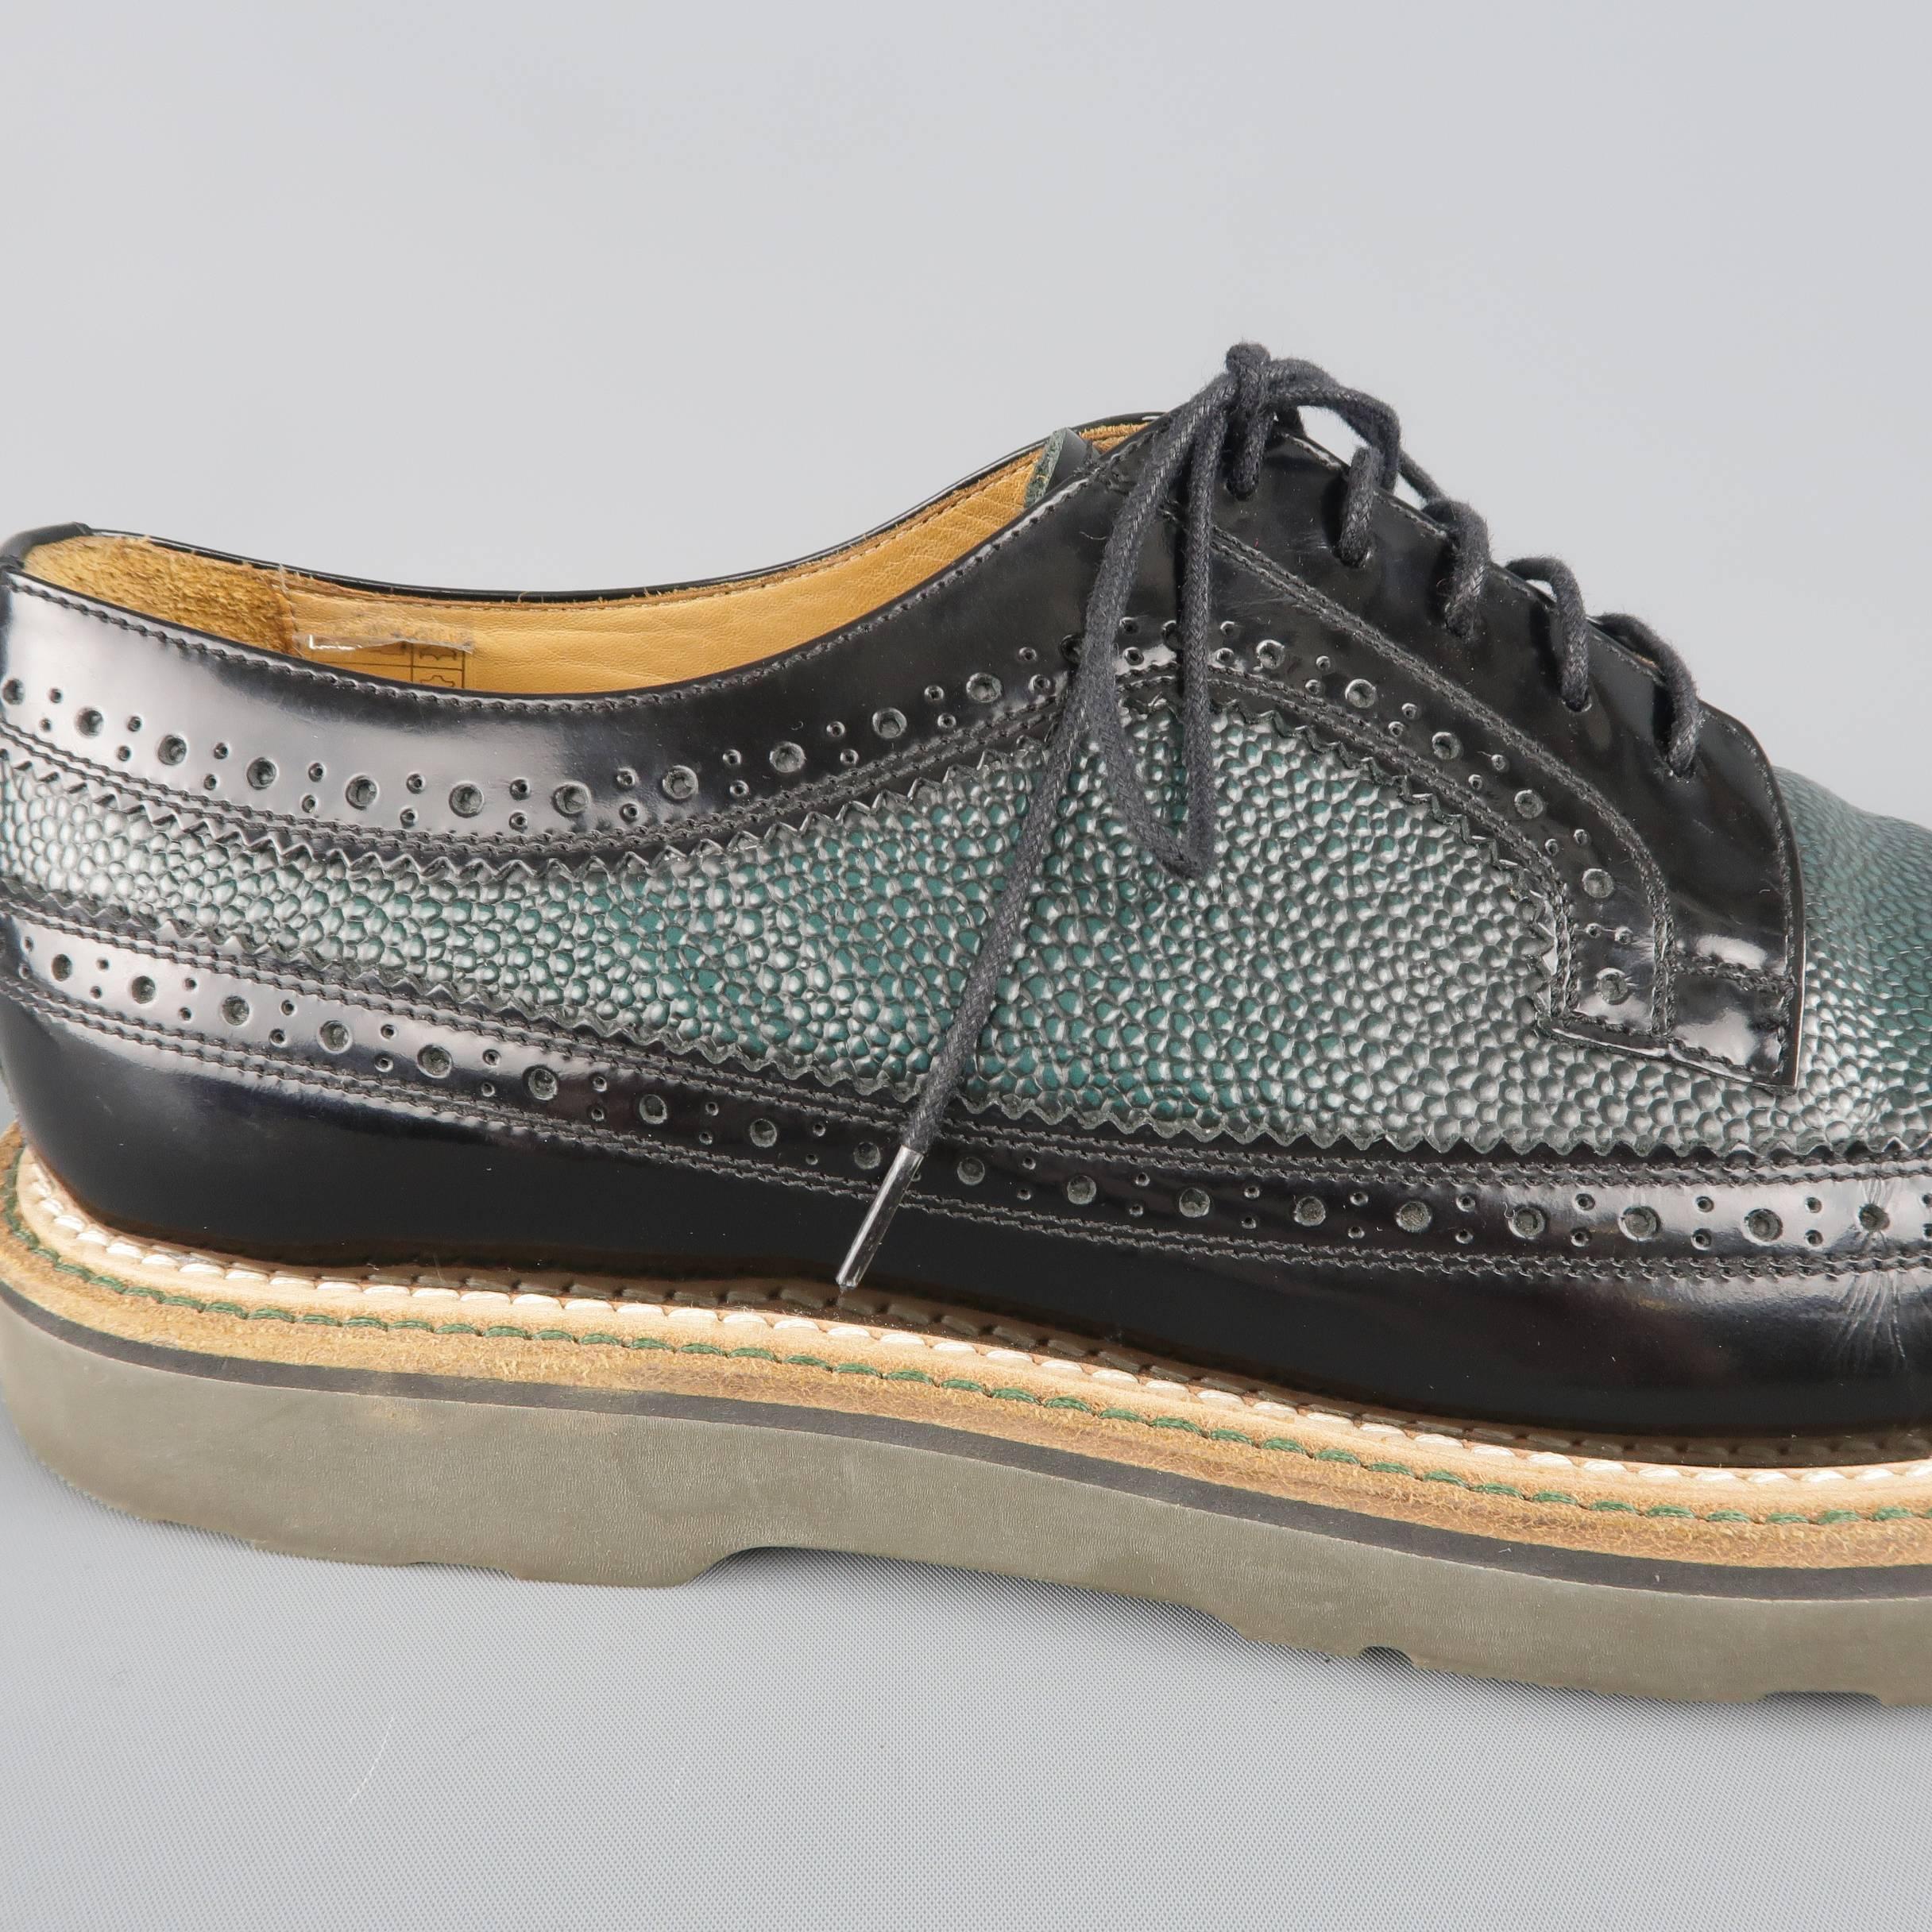 PAUL SMITH lace up dress shoes come in black patent leather with a forest green pebbled leather mid panel and feature a rounded point wingtip toe, perforated brogue details throughout, and leather and robber sole. Made in Italy.
 
Good Pre-Owned